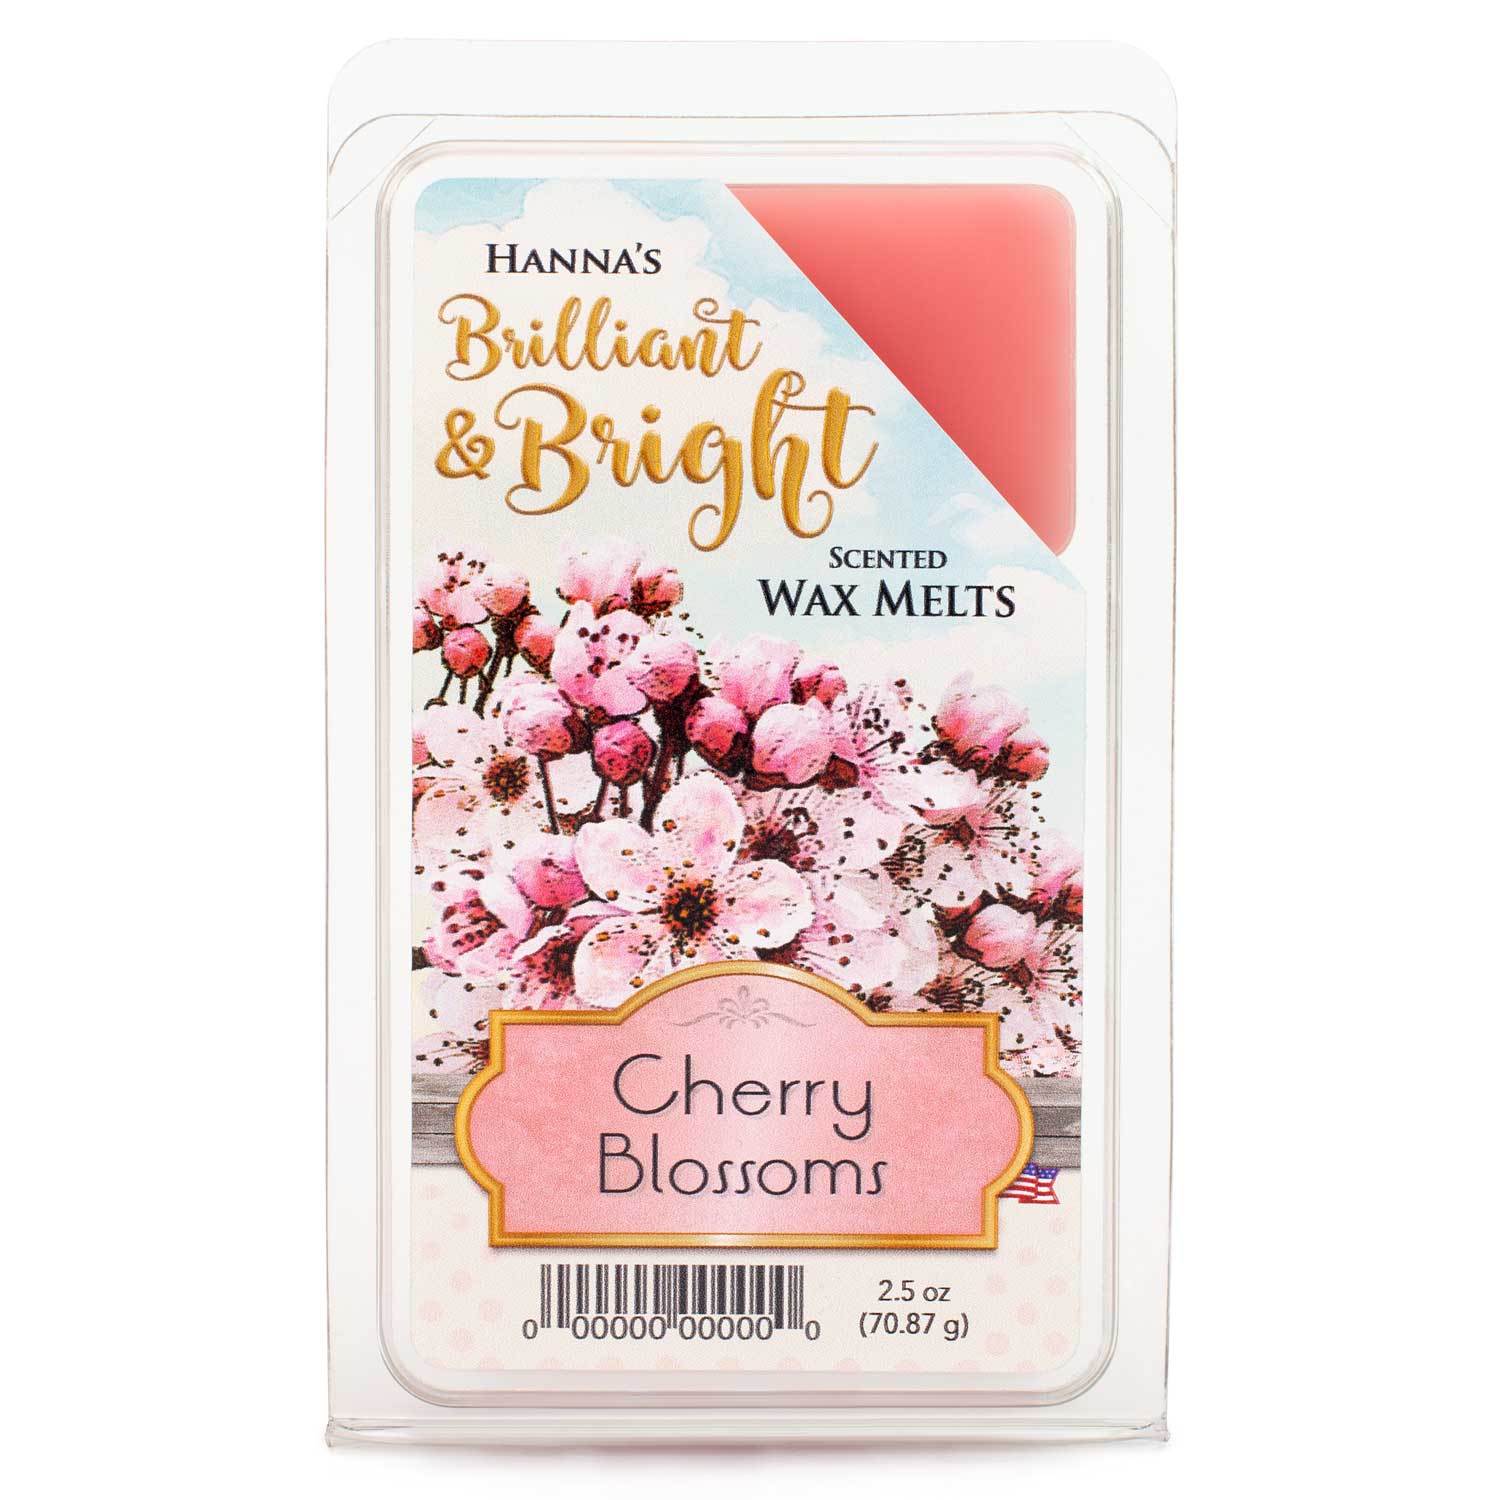 Buy Cherry Blossoms Scented Wax Melts at for only 2.49